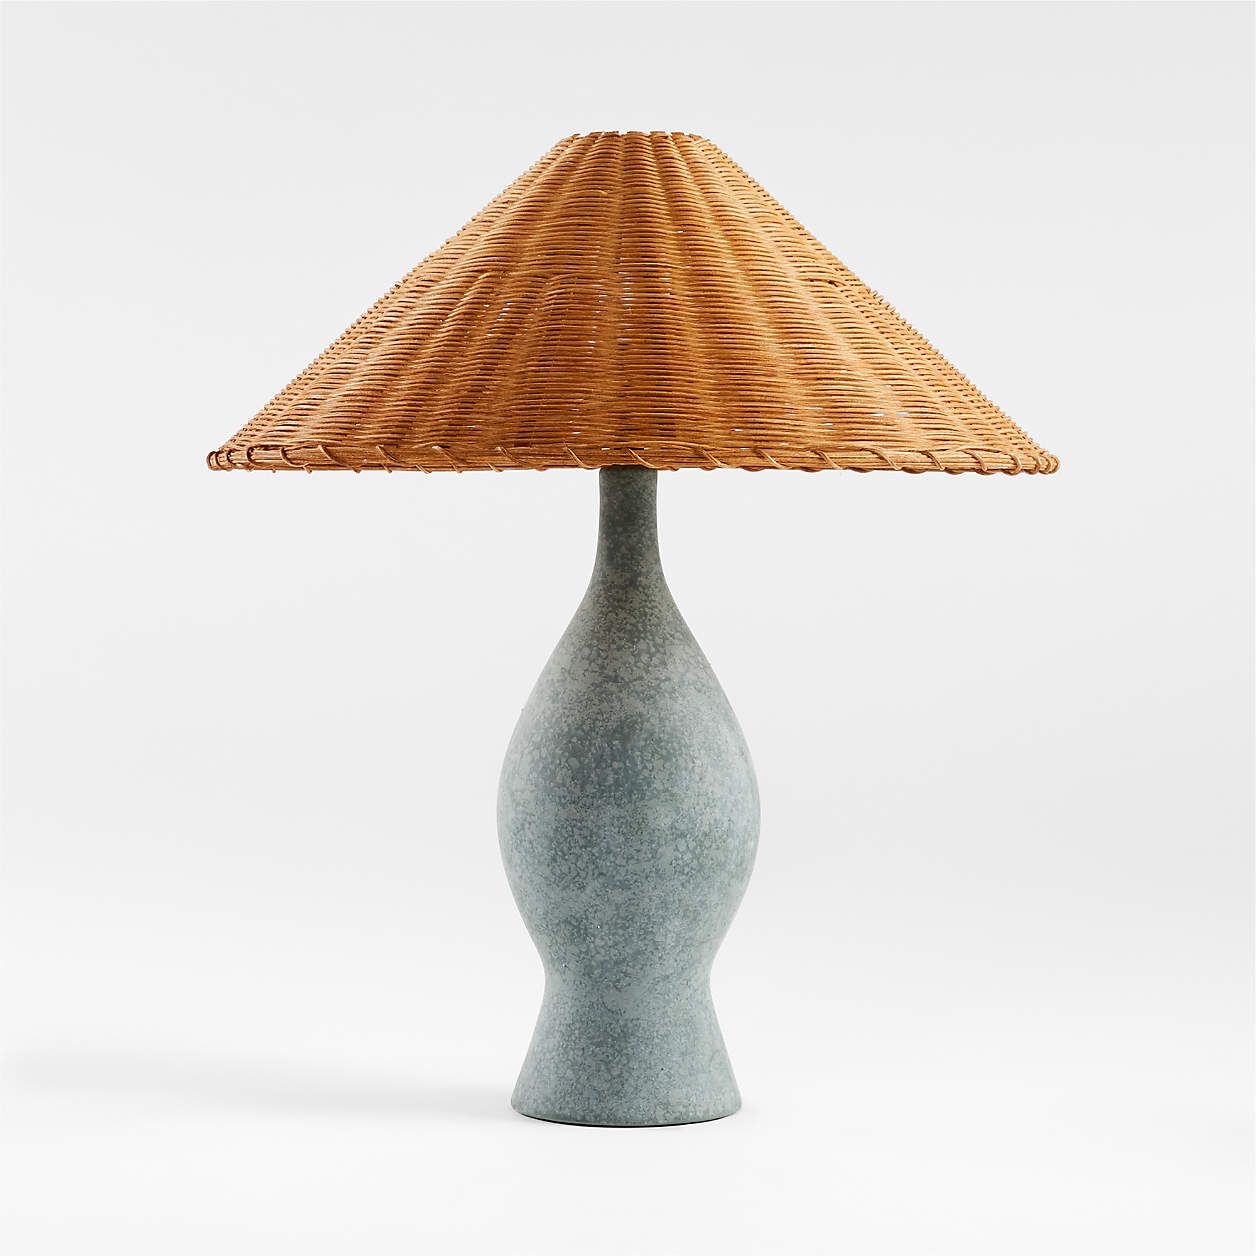 Green Ceramic Curve Table Lamp with Rattan Shade by Athena Calderone